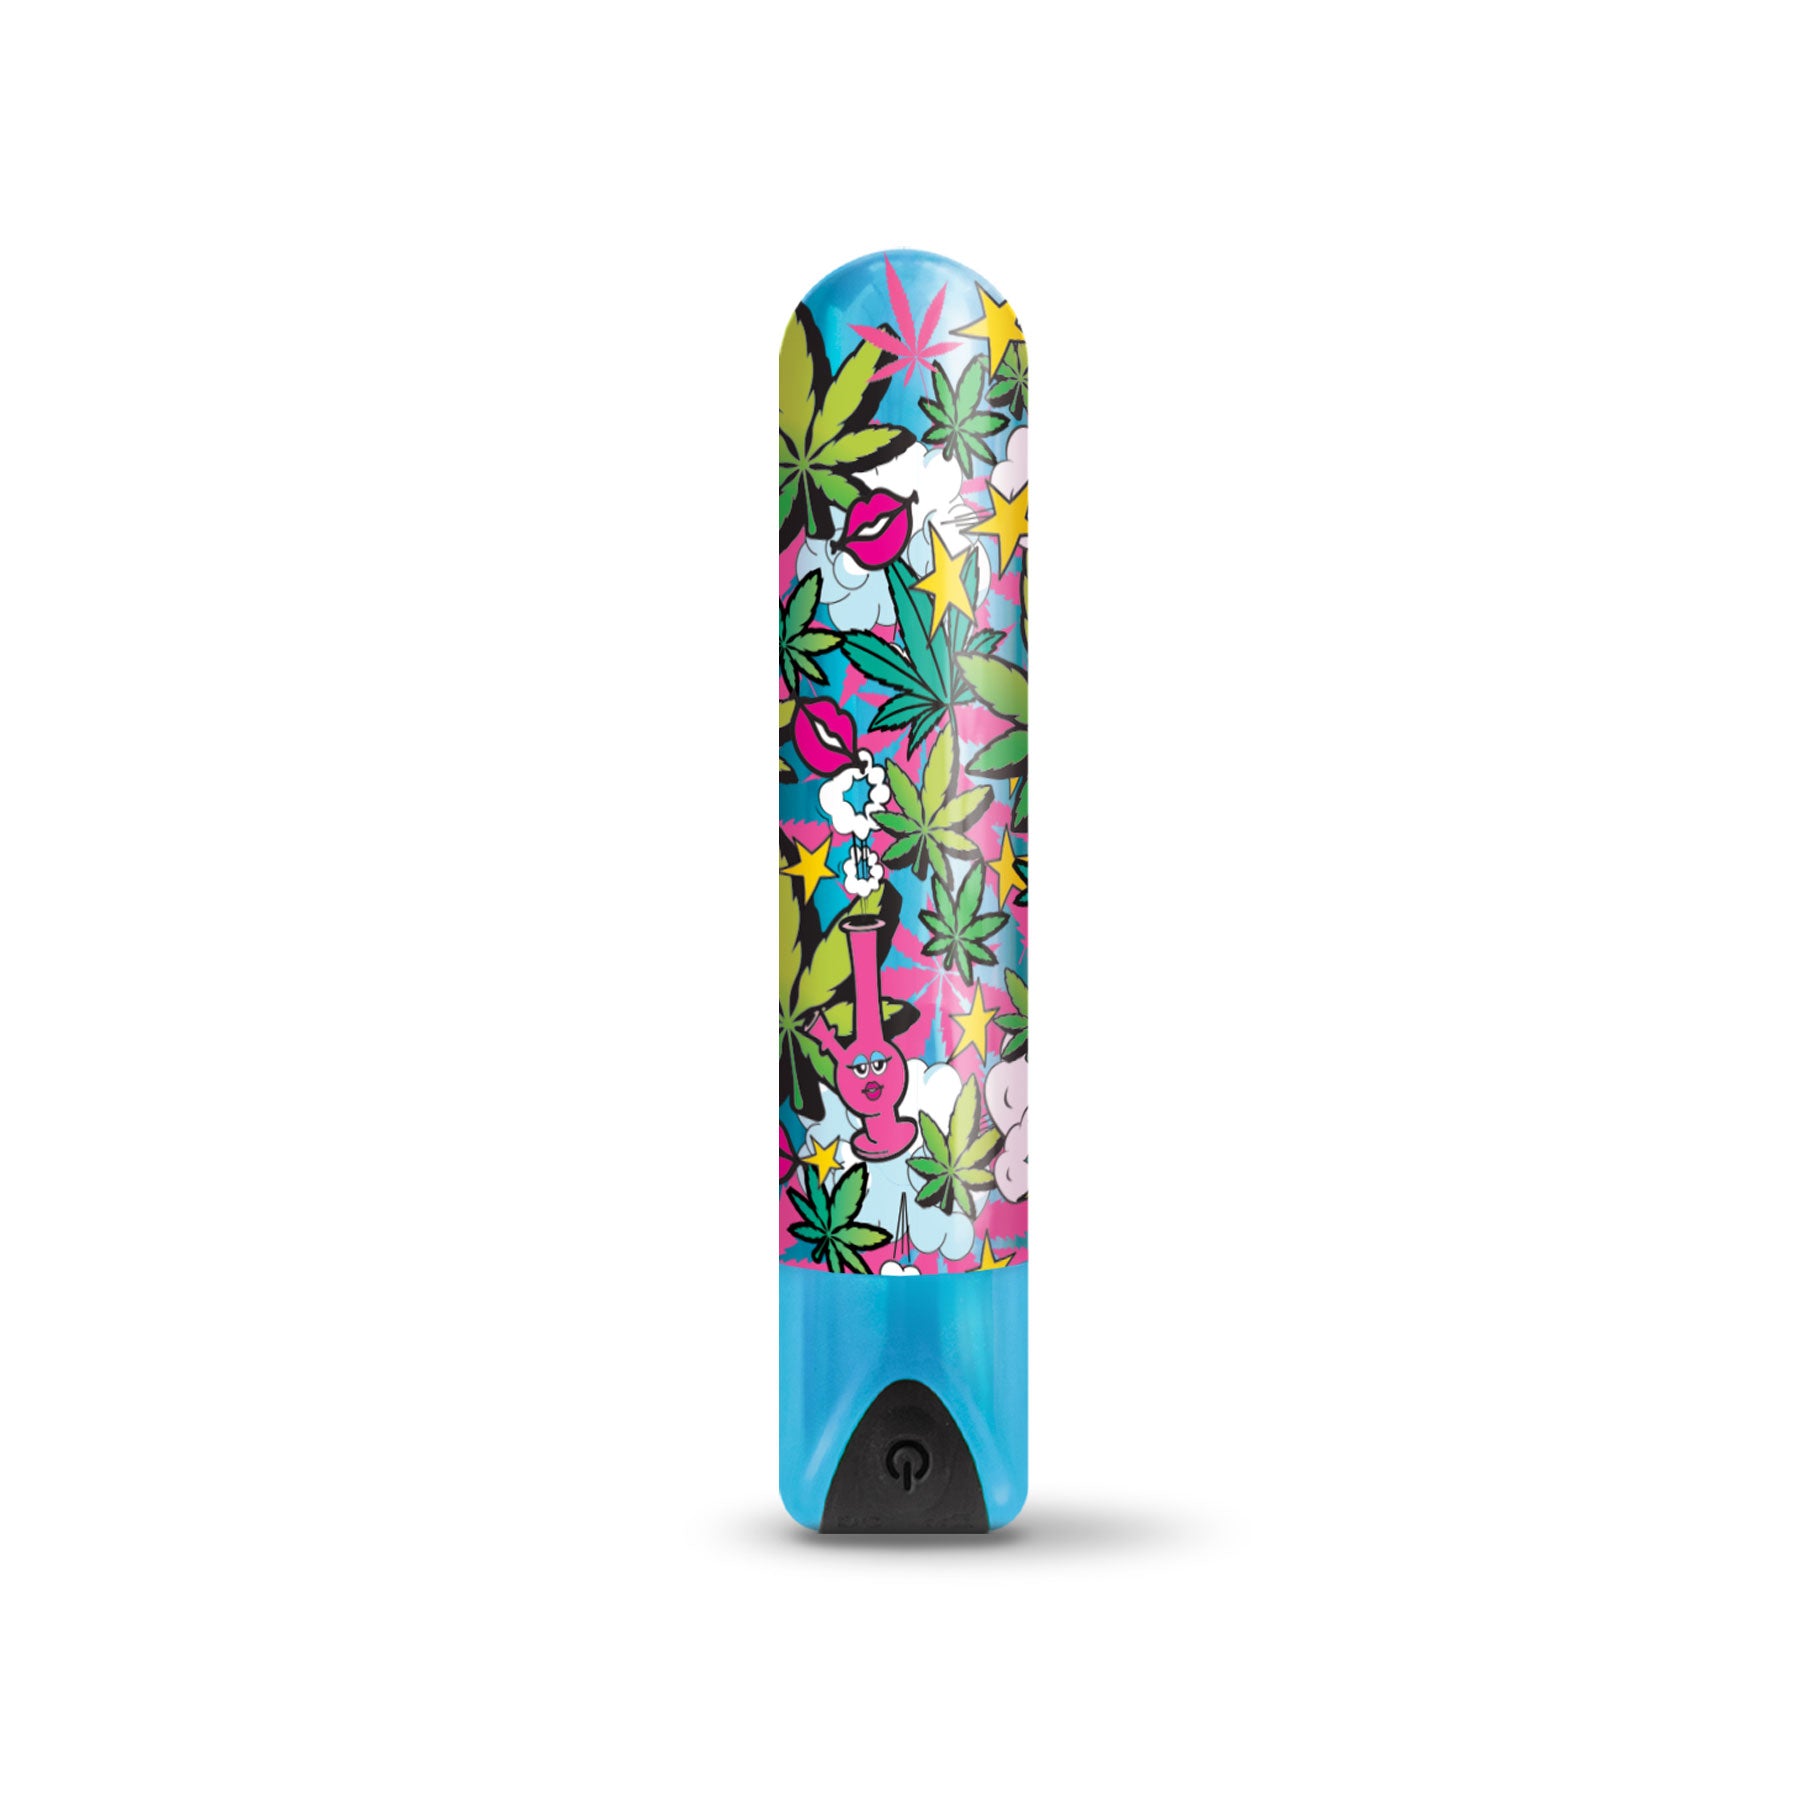 Prints Charming Buzzed Higher Power Rechargeable Bullet - Stoner Chick GN-1000103